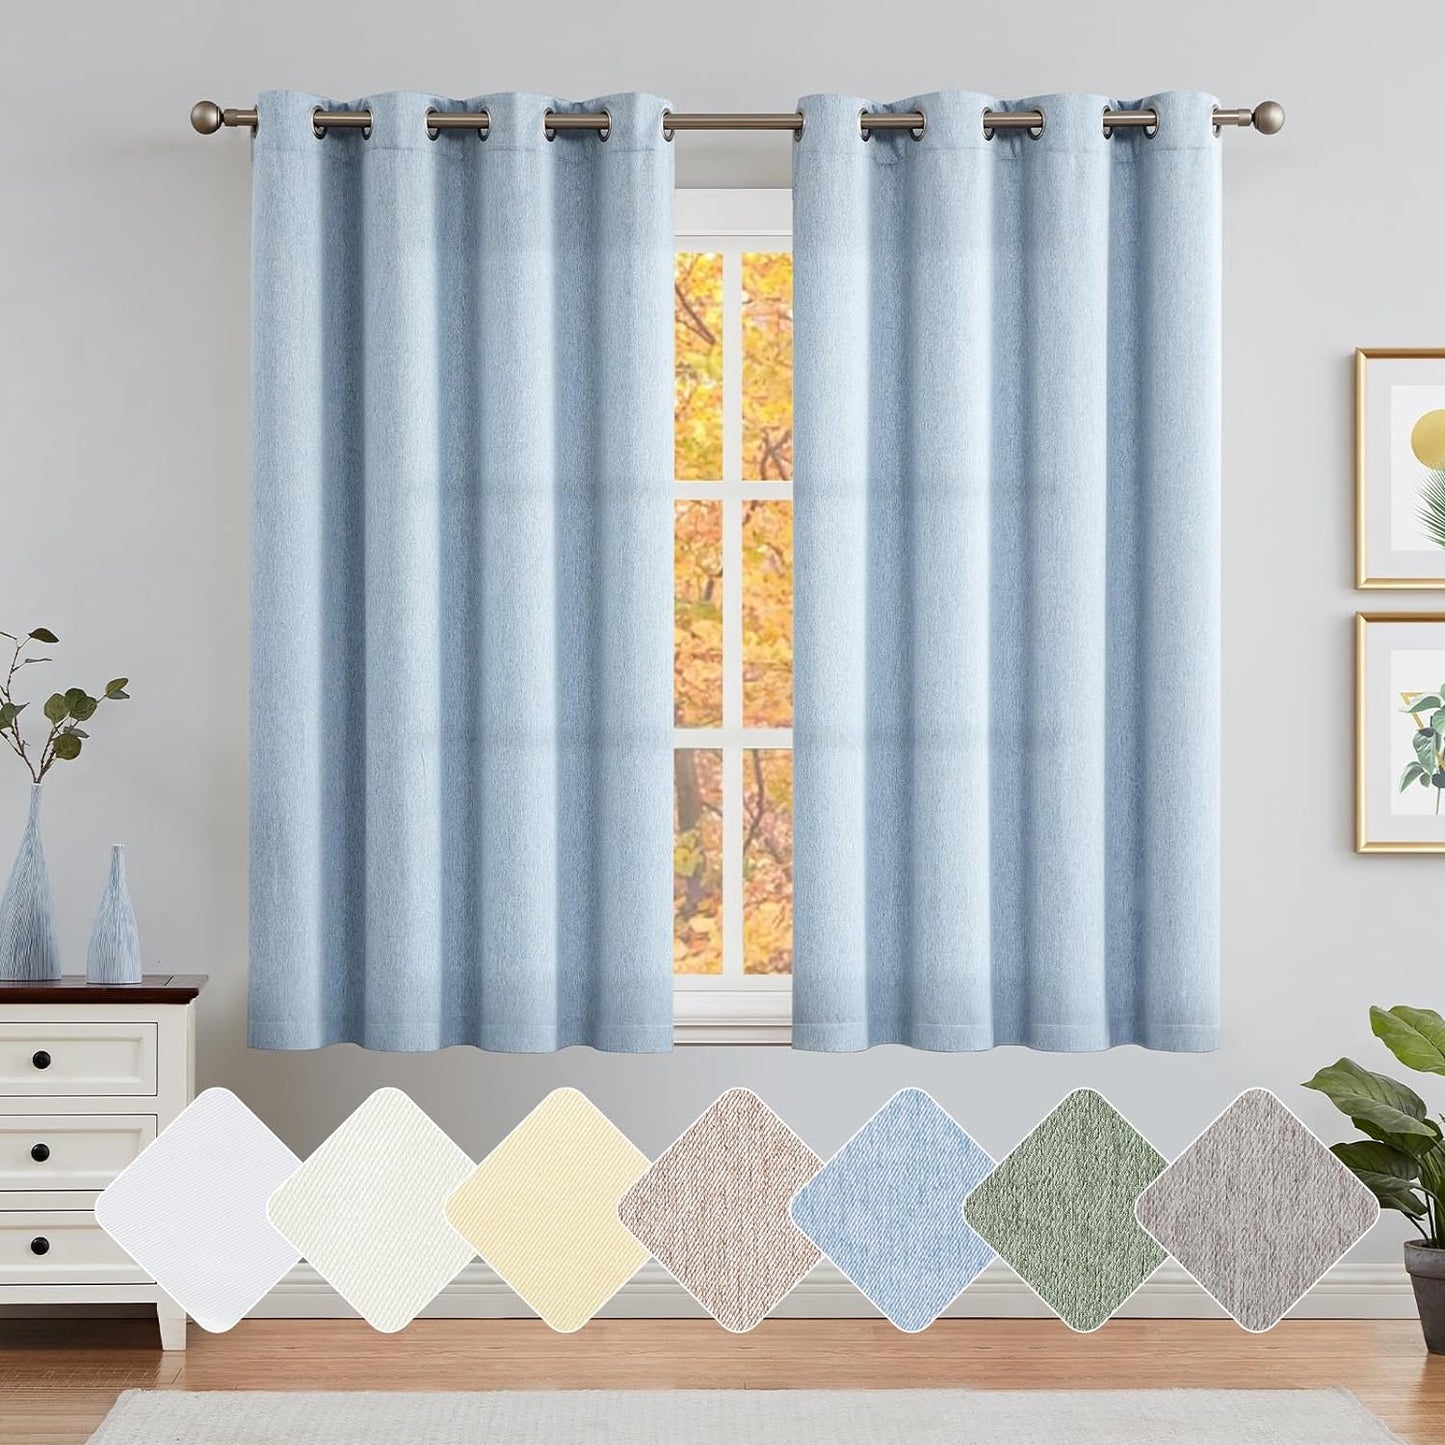 Jinchan Curtains for Bedroom Living Room 84 Inch Long Room Darkening Farmhouse Country Window Curtains Heathered Denim Blue Curtains Grommet Curtains Drapes 2 Panels  CKNY HOME FASHION *Denim Blue 50"W X 63"L 